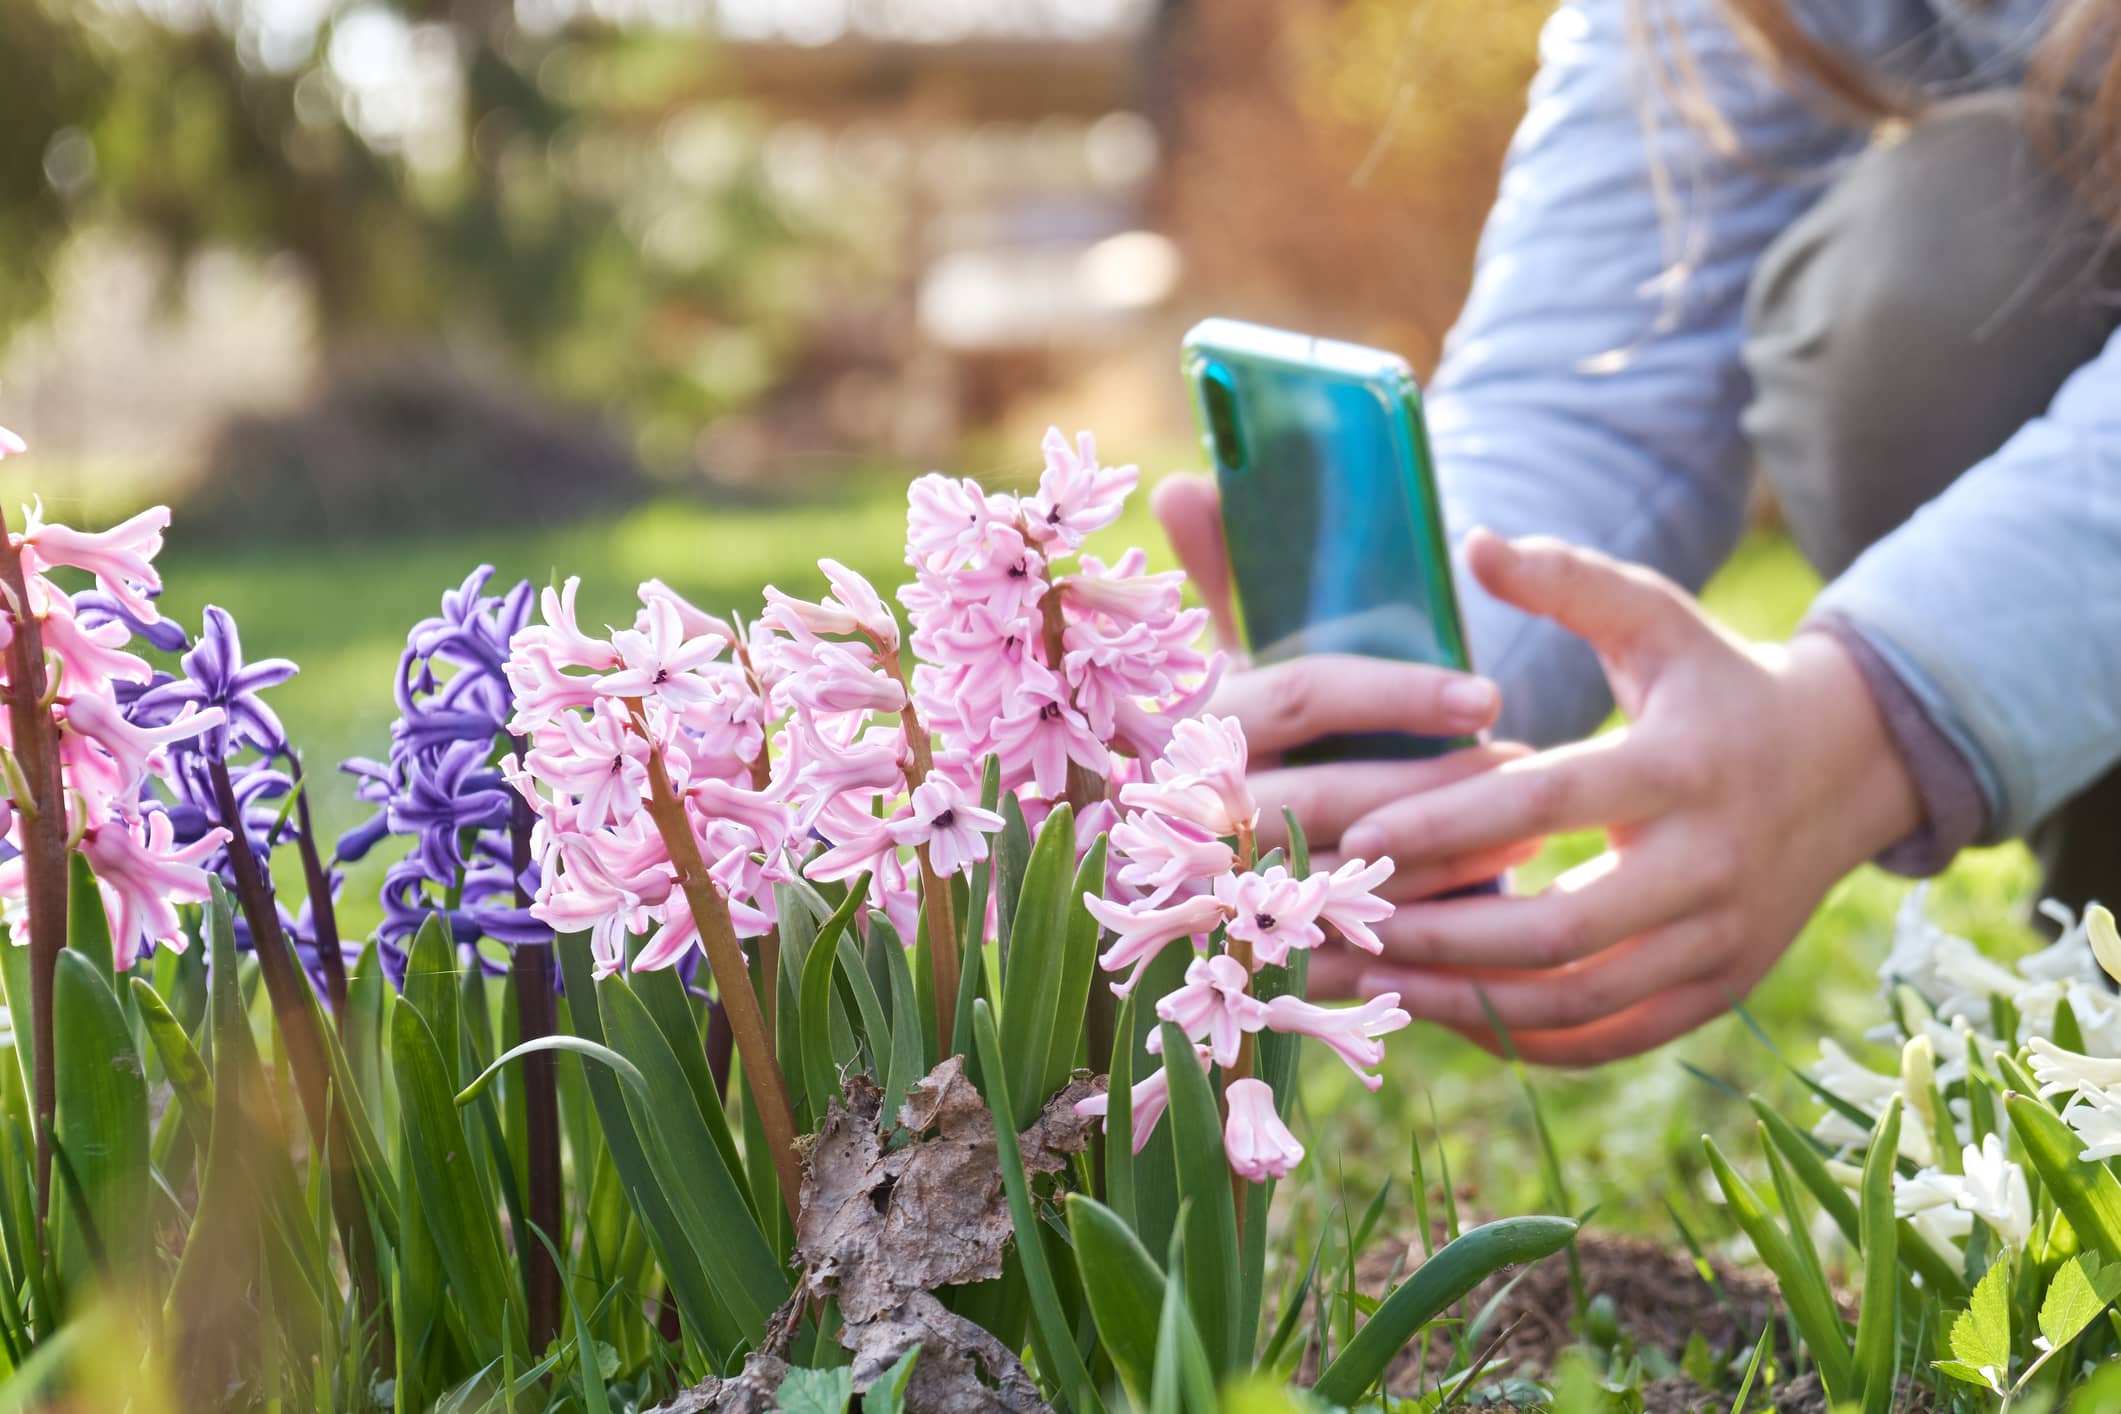 Gen Z snap an average of 17 pics a month of their green fingered efforts